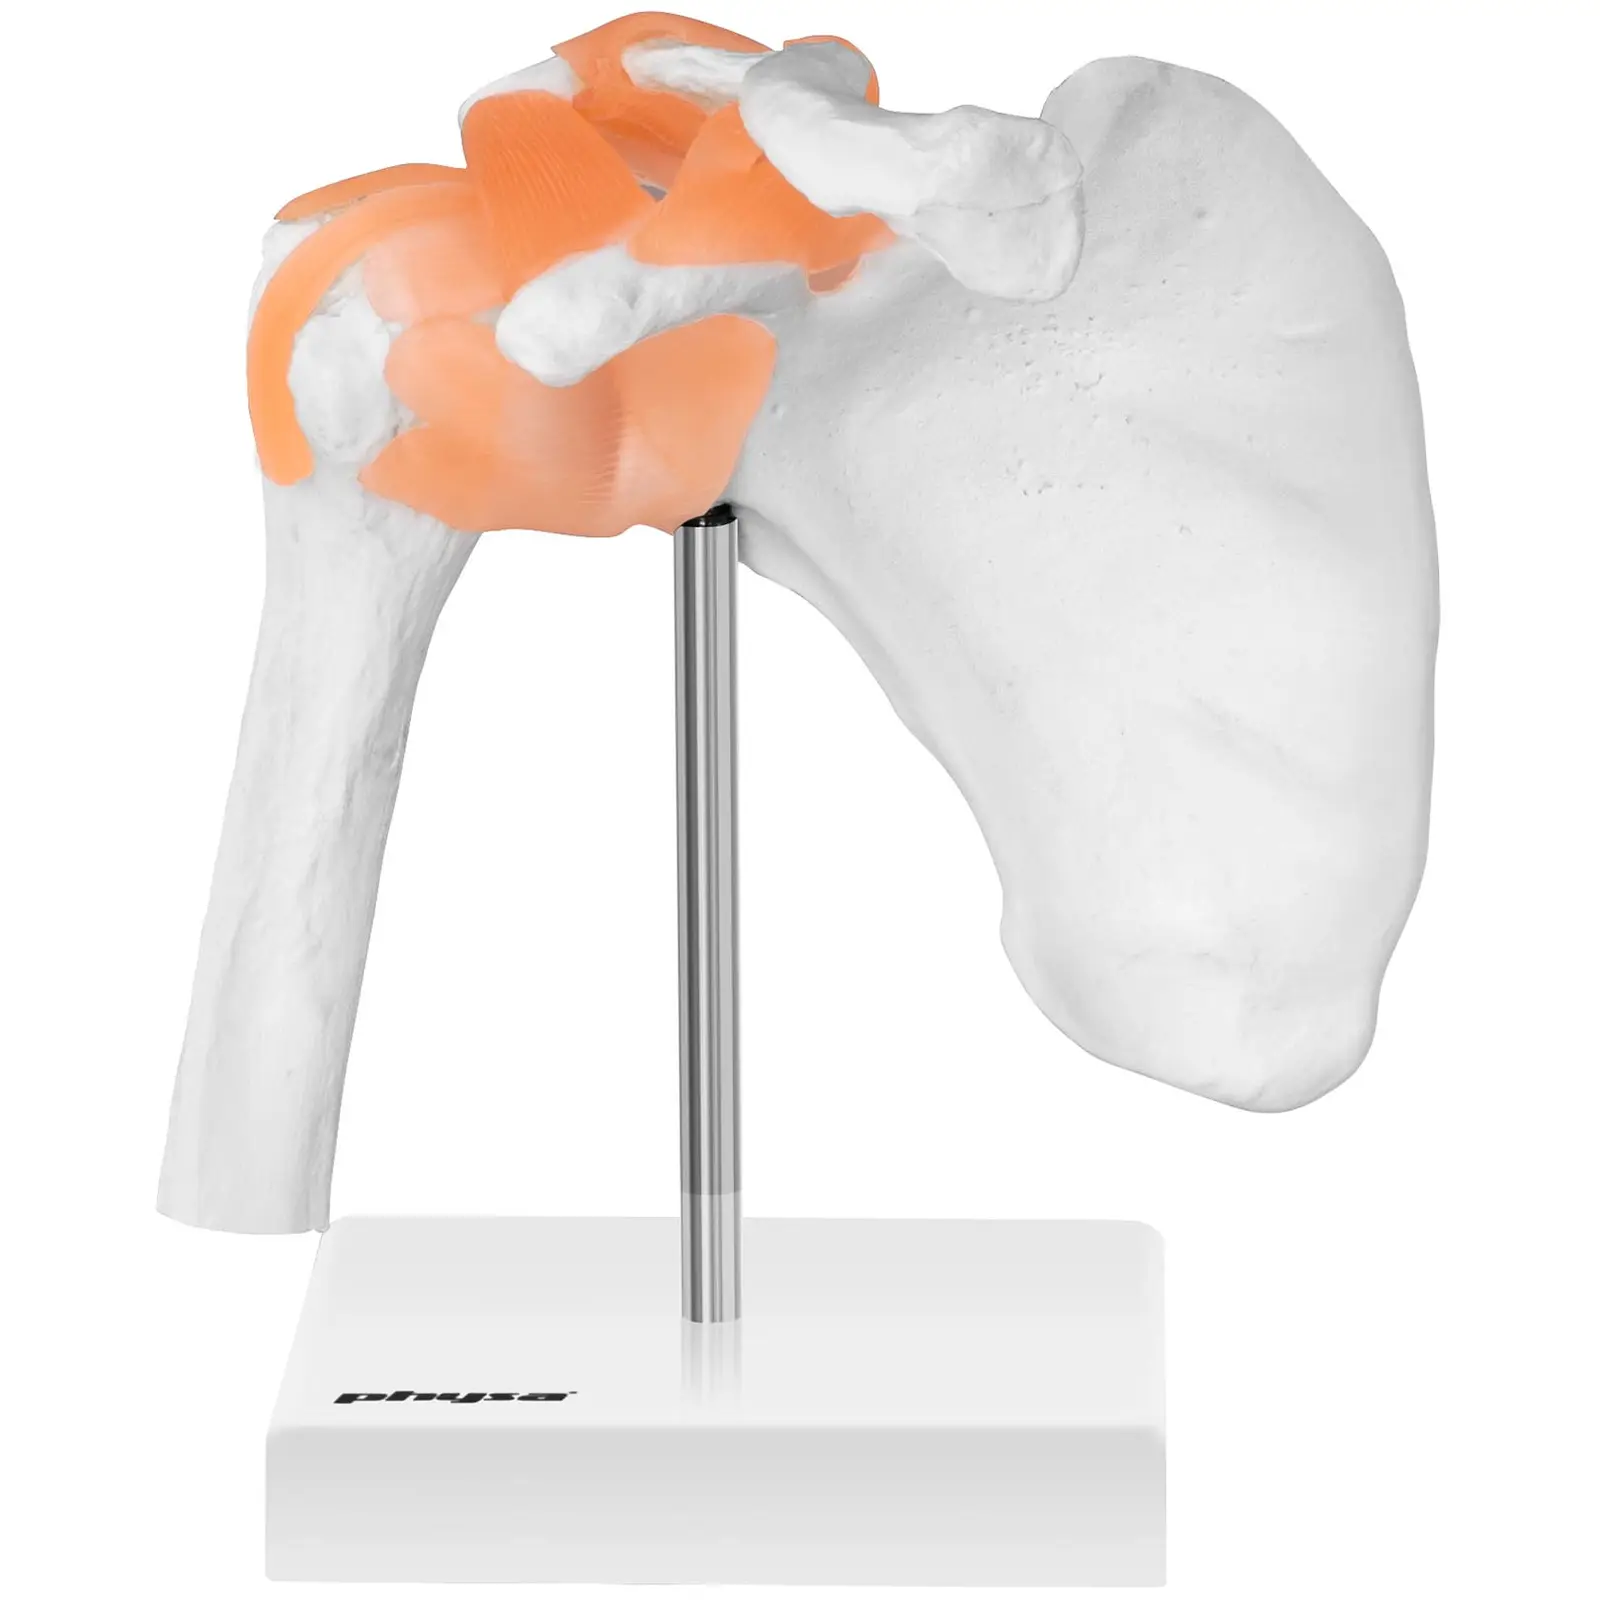 Axel - Anatomisk modell PHY-SJ-1